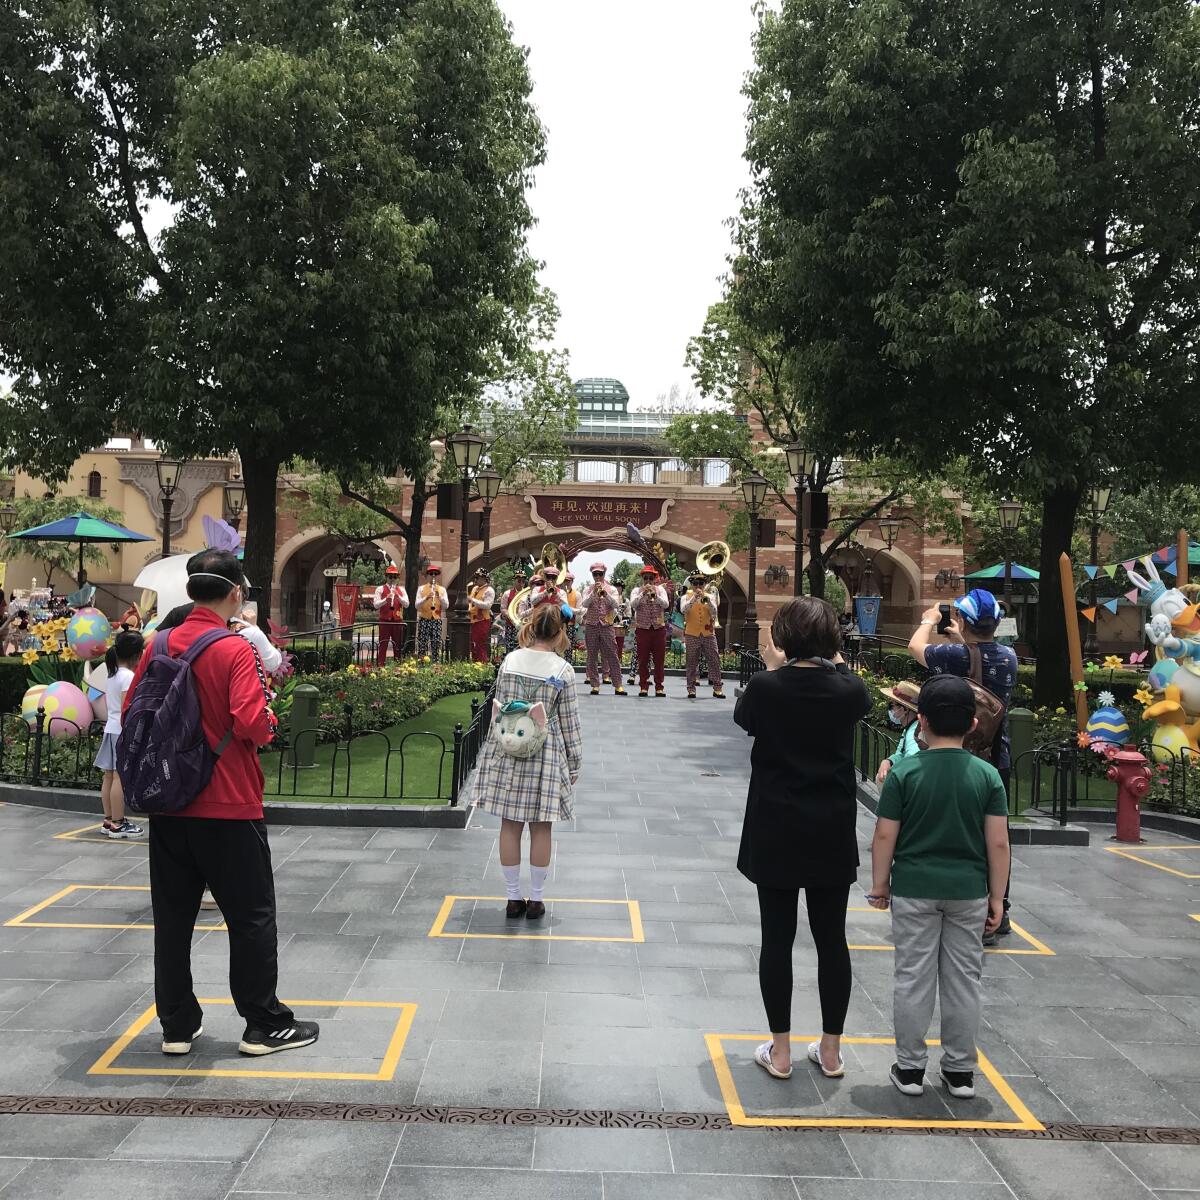 Yellow boxes are taped on the ground to maintain social distancing among visitors inside the park. One family is allowed to stand in each box.